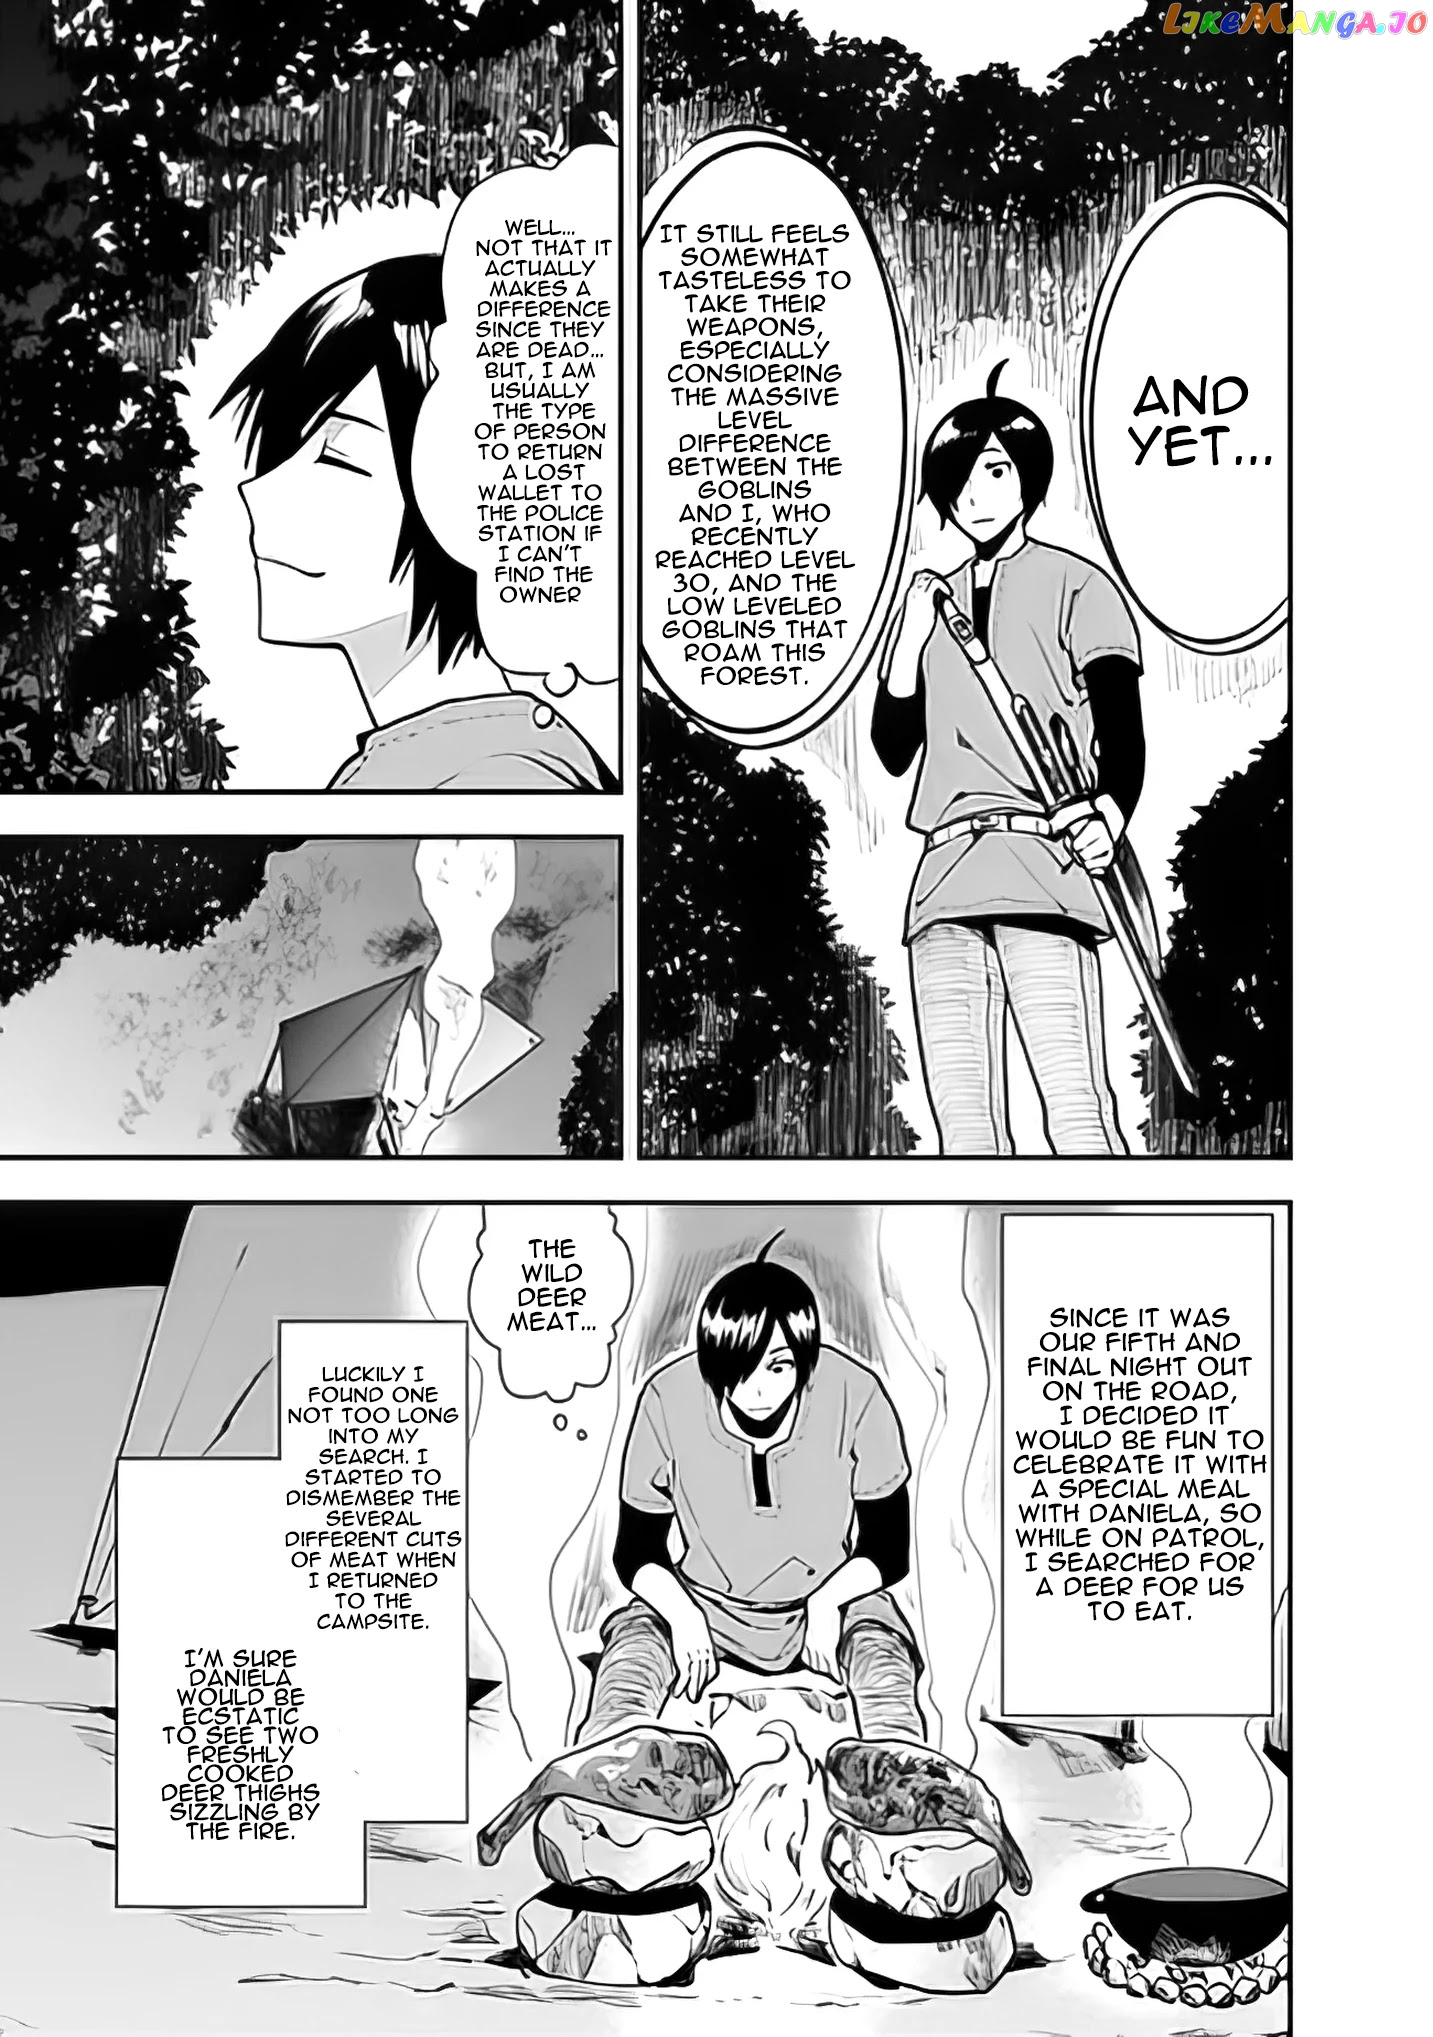 I Came To Another World As A Jack Of All Trades And A Master Of None To Journey While Relying On Quickness chapter 13 - page 8